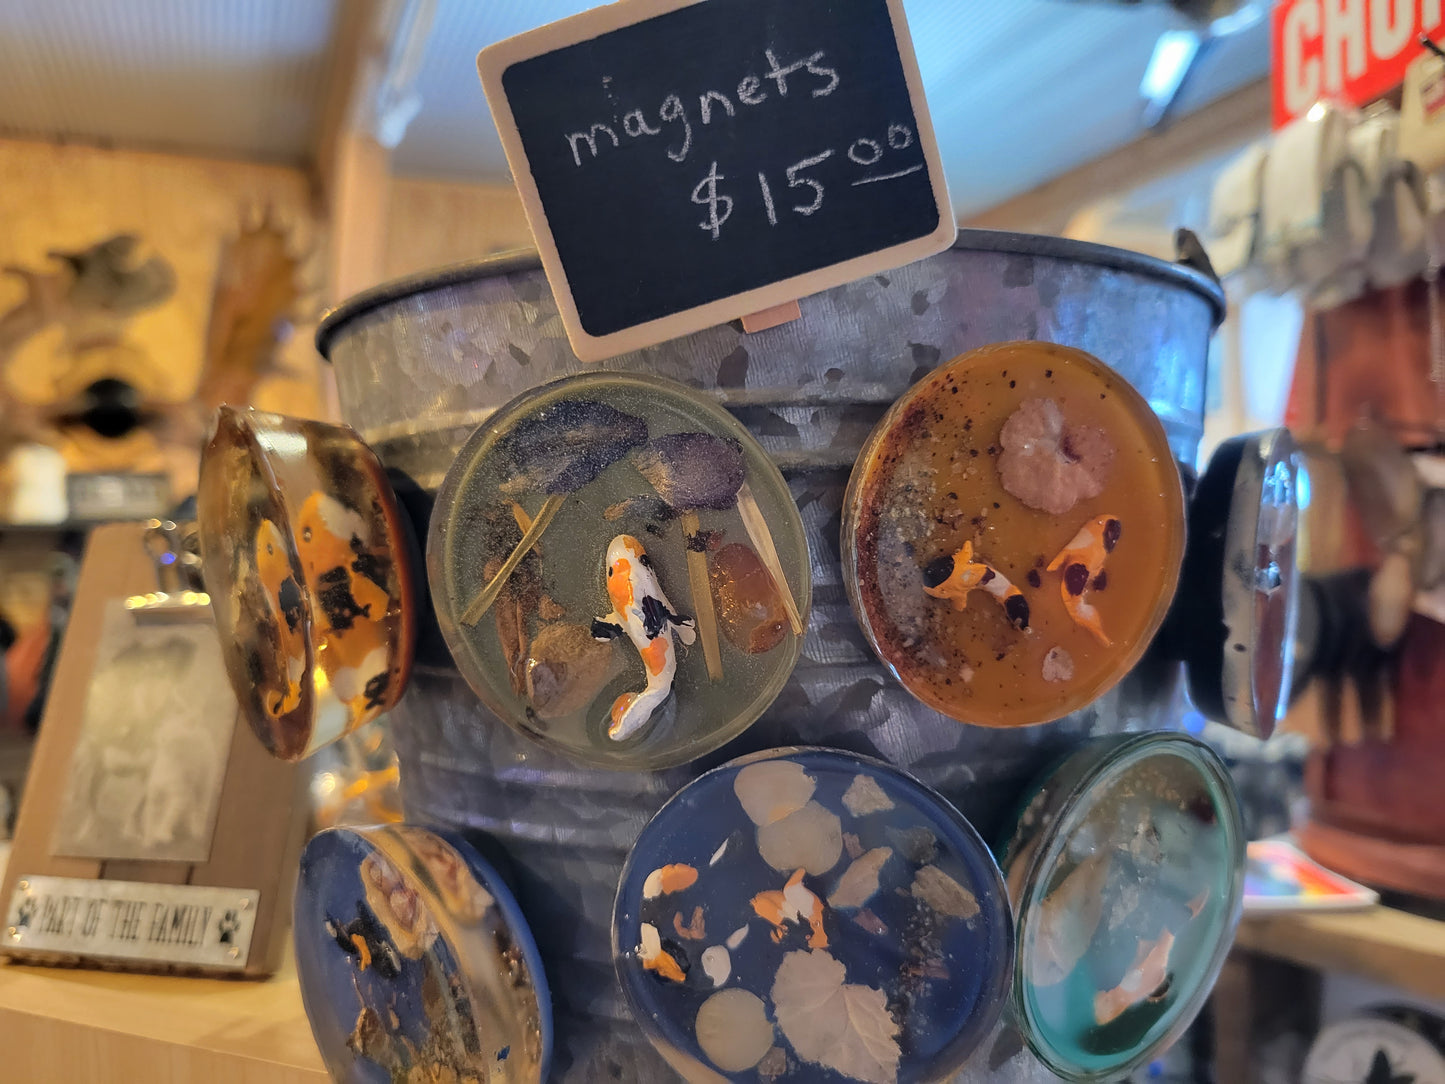 Magnets - hand crafted with natural items